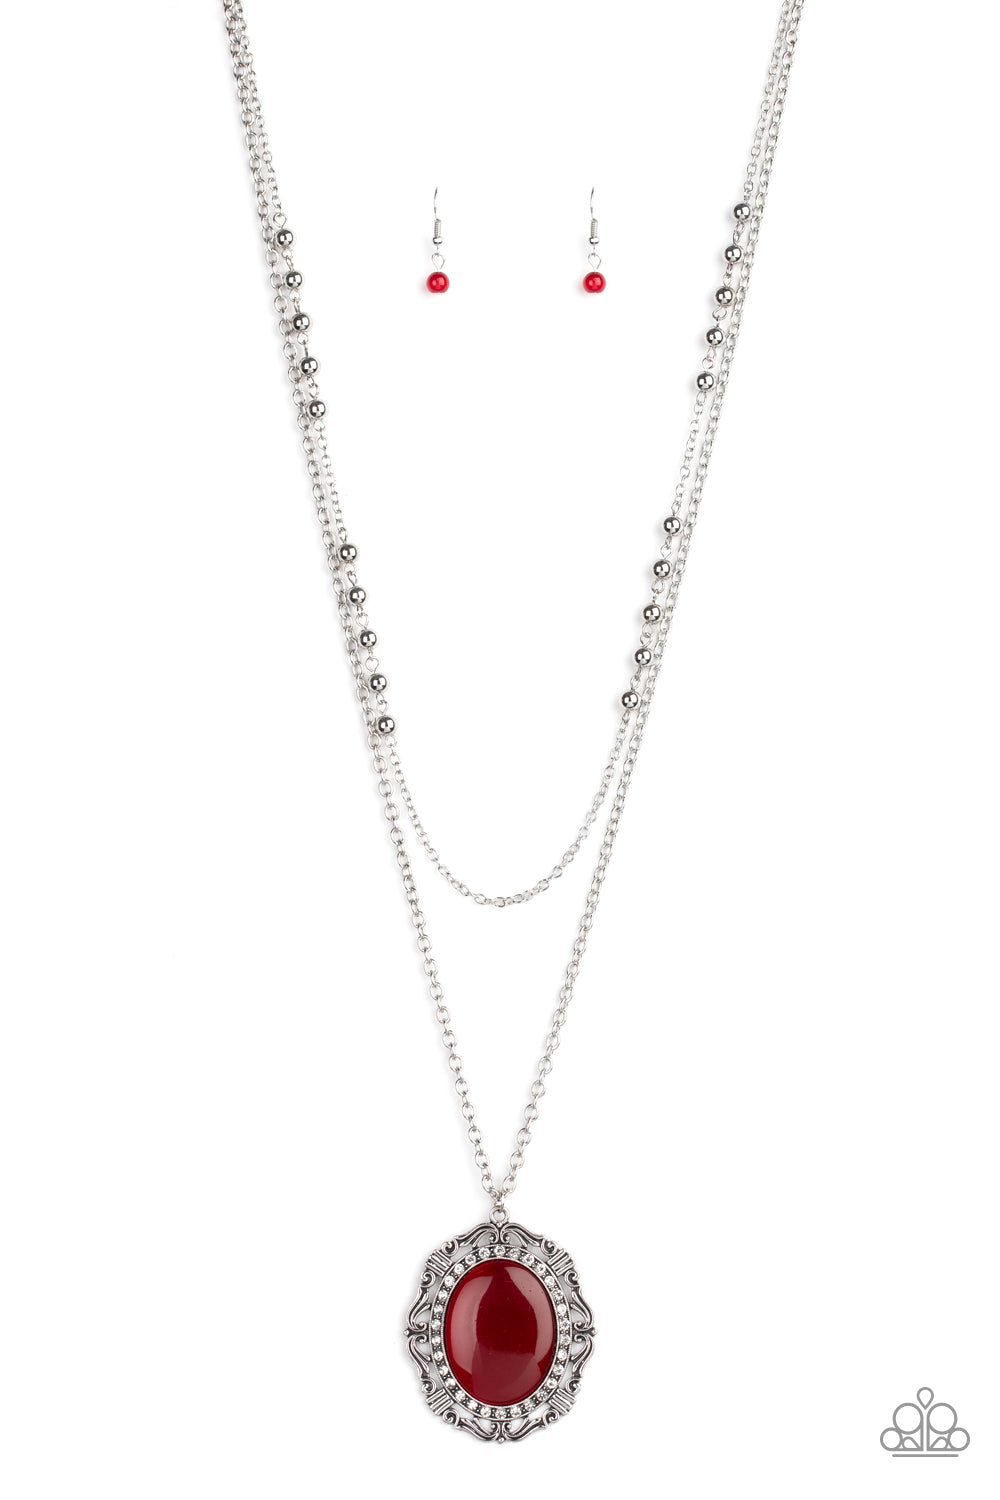 Endlessly Enchanted Red Necklace